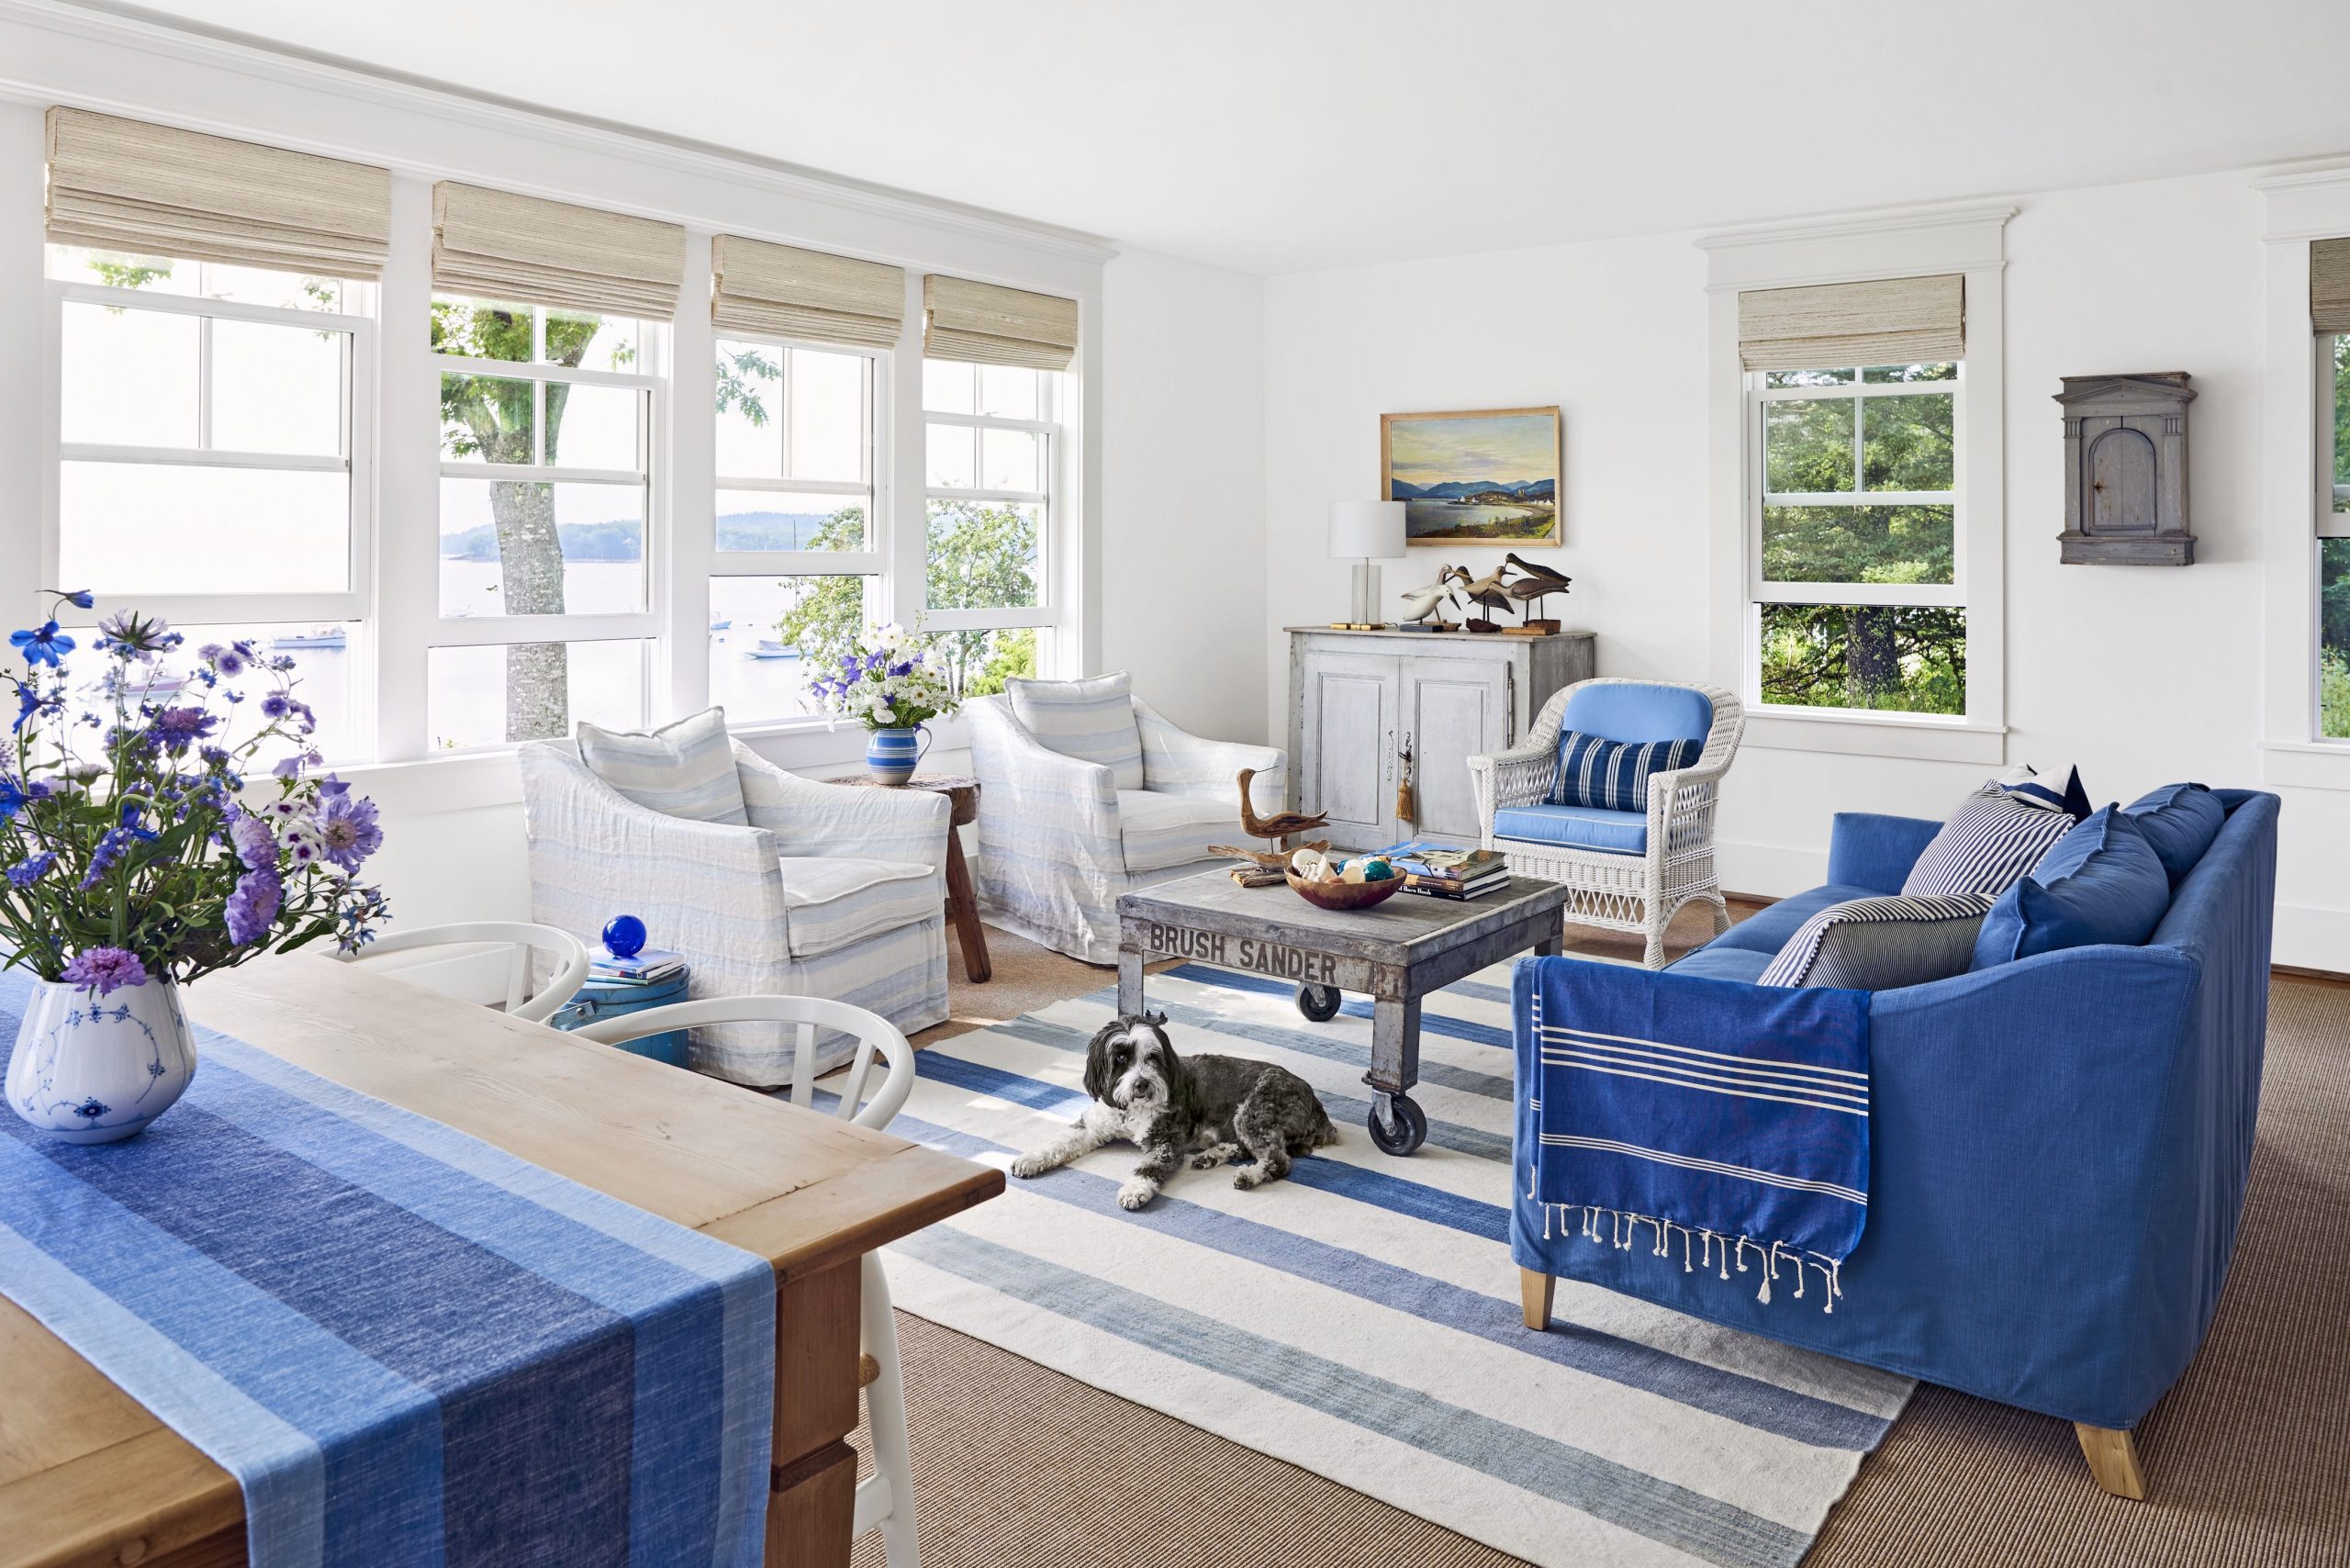 How to Decorate Your Beach House